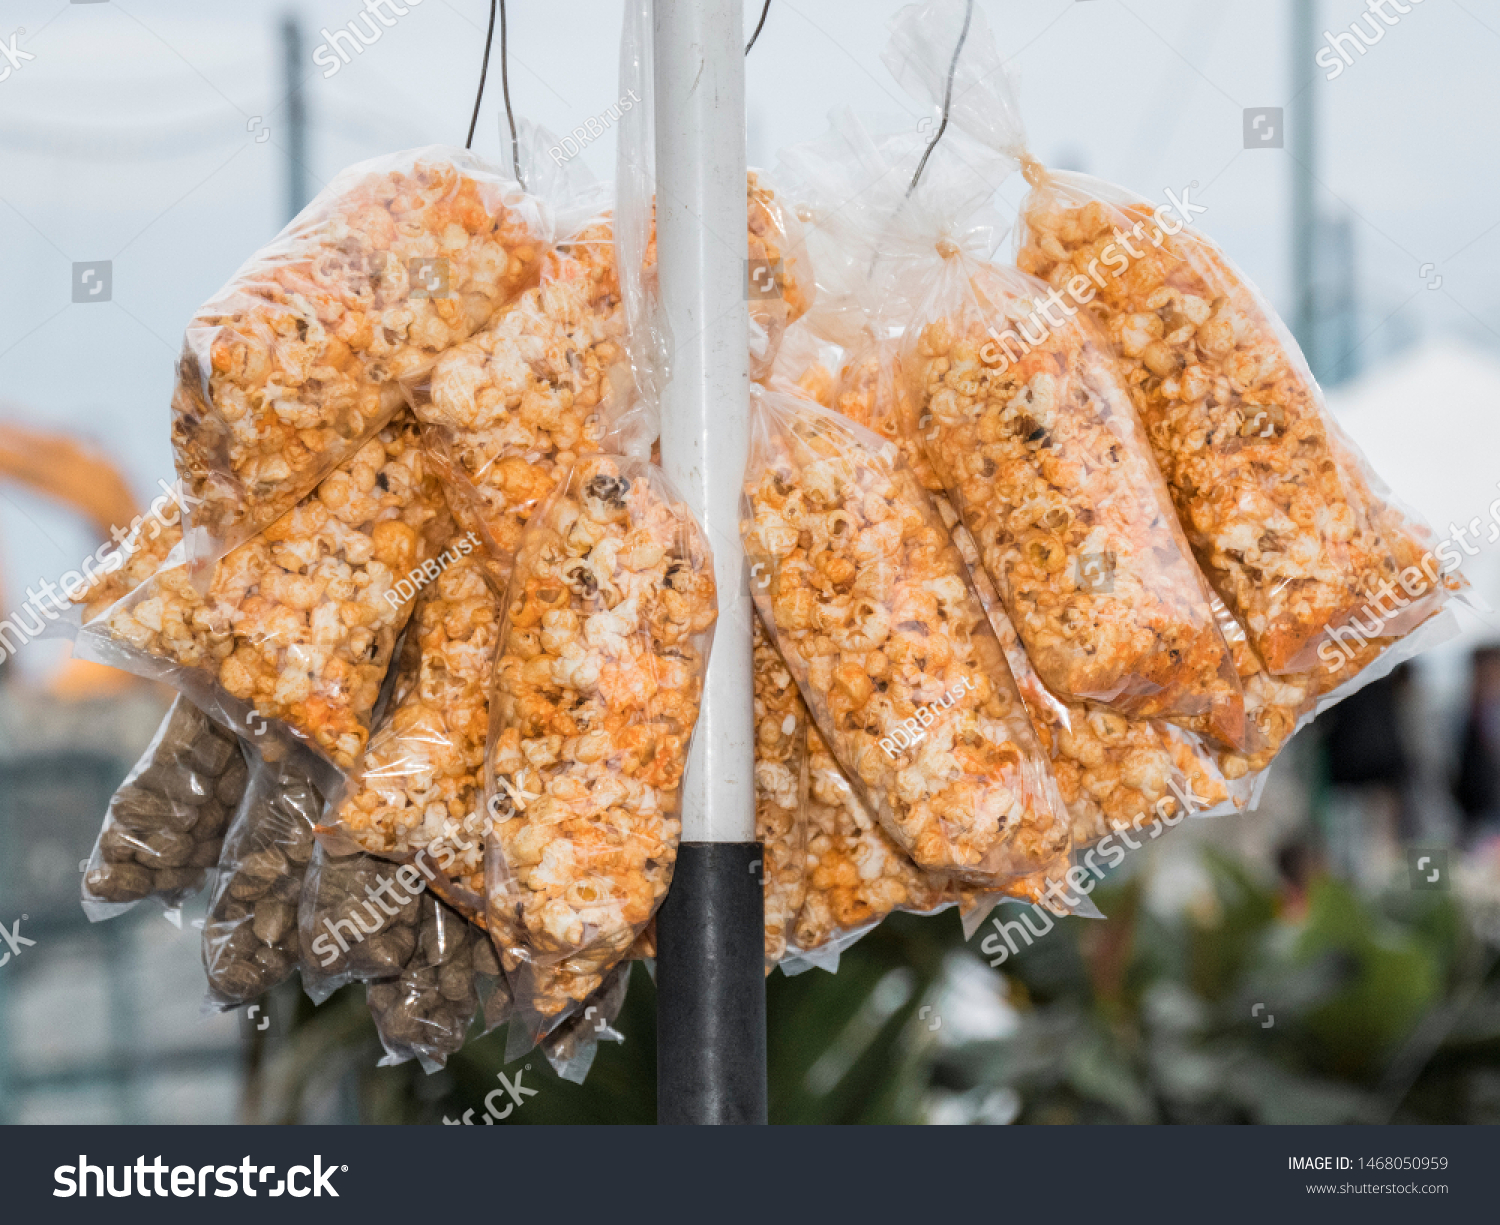 Download Cheese Yellow Popcorn Plastic Bags Stock Photo Edit Now 1468050959 Yellowimages Mockups